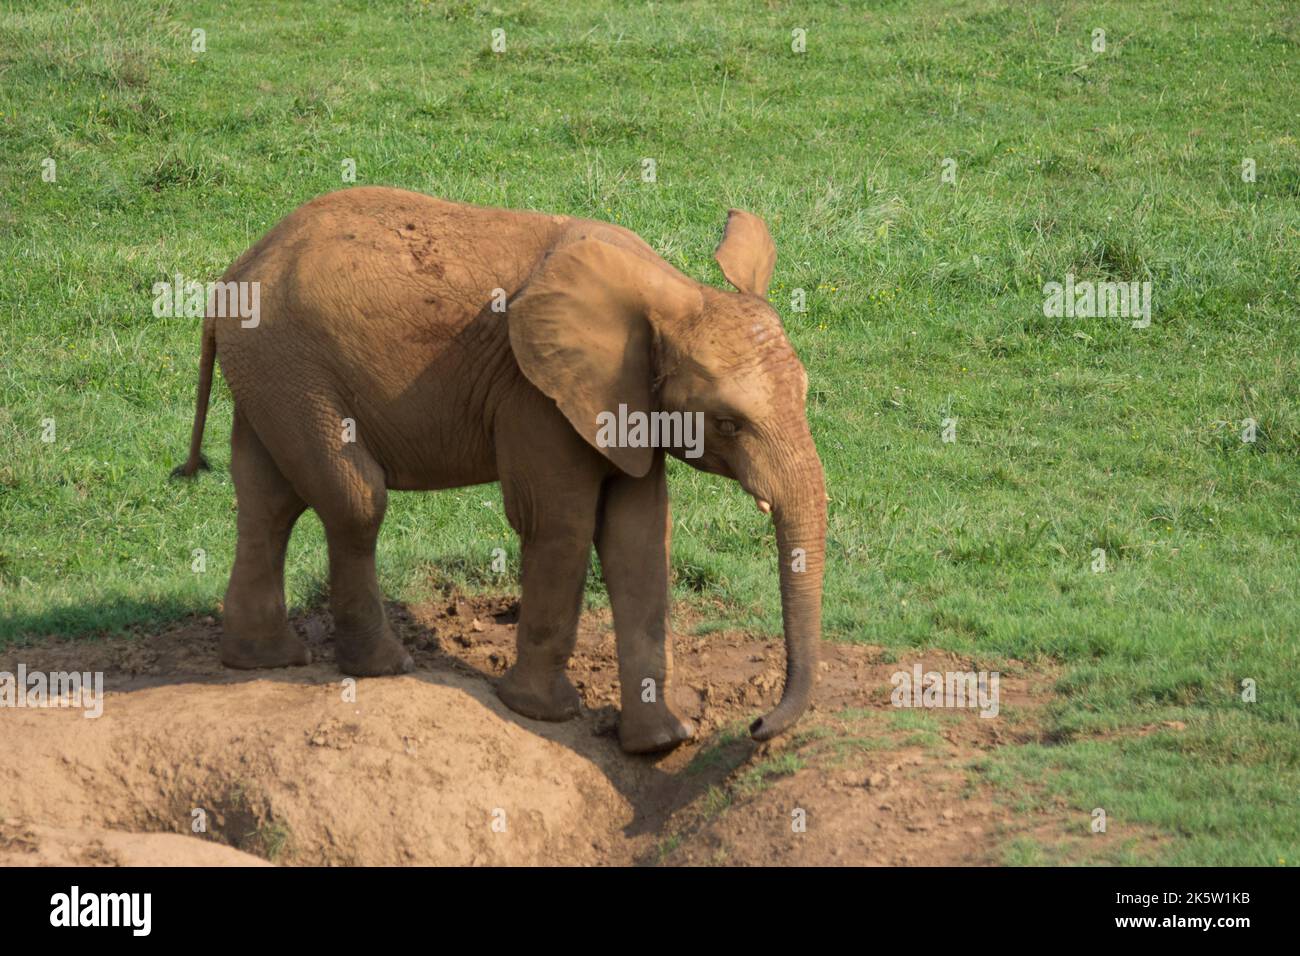 brown elephant drinking water from a pond in the ground with its trunk  Stock Photo